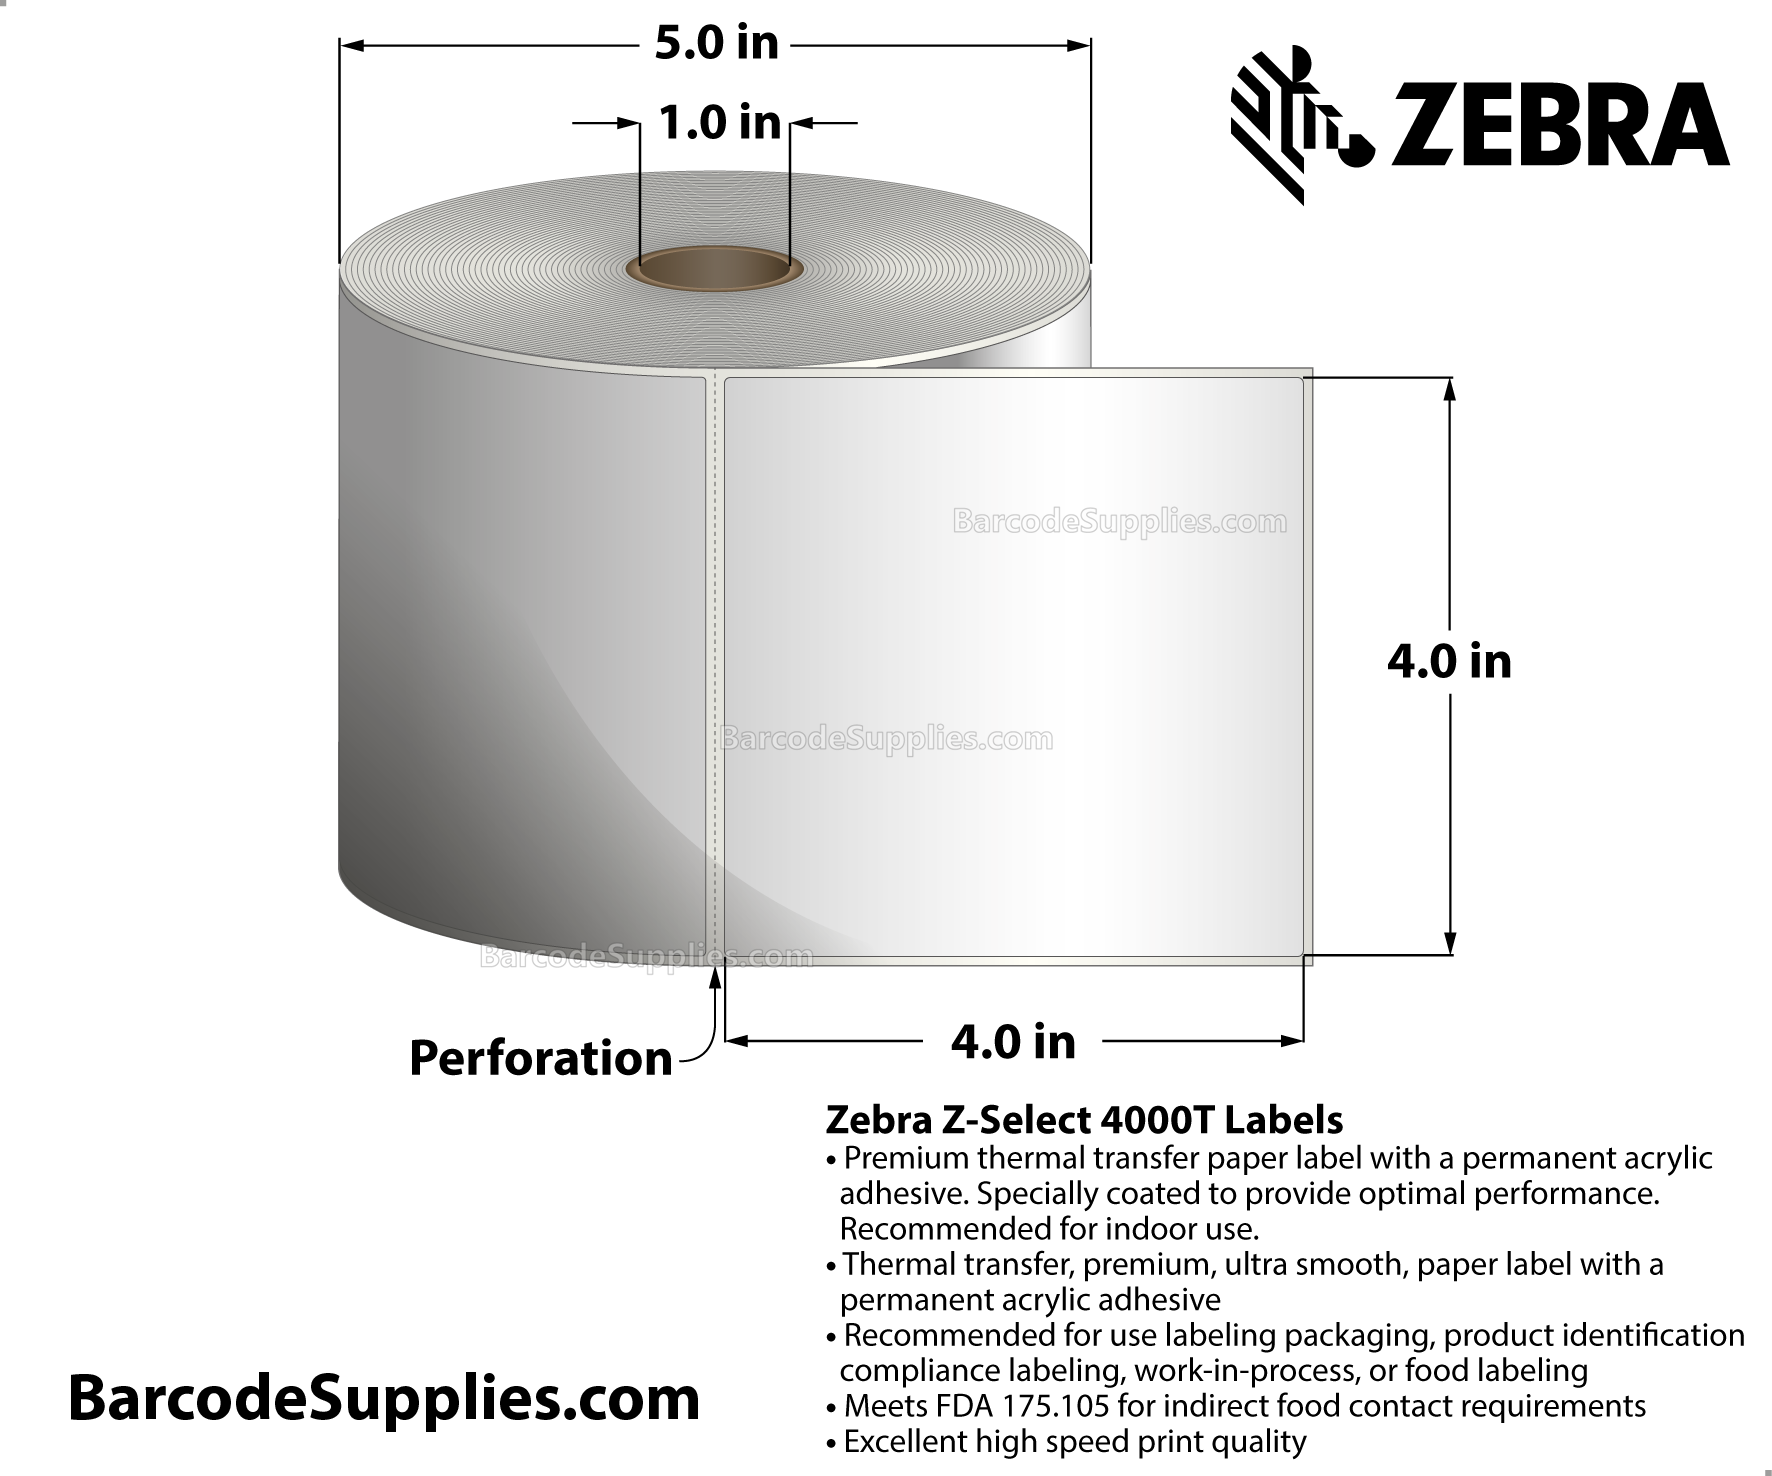 4 x 4 Thermal Transfer White Z-Select 4000T Labels With Permanent Adhesive - Perforated - 700 Labels Per Roll - Carton Of 12 Rolls - 8400 Labels Total - MPN: 800274-405